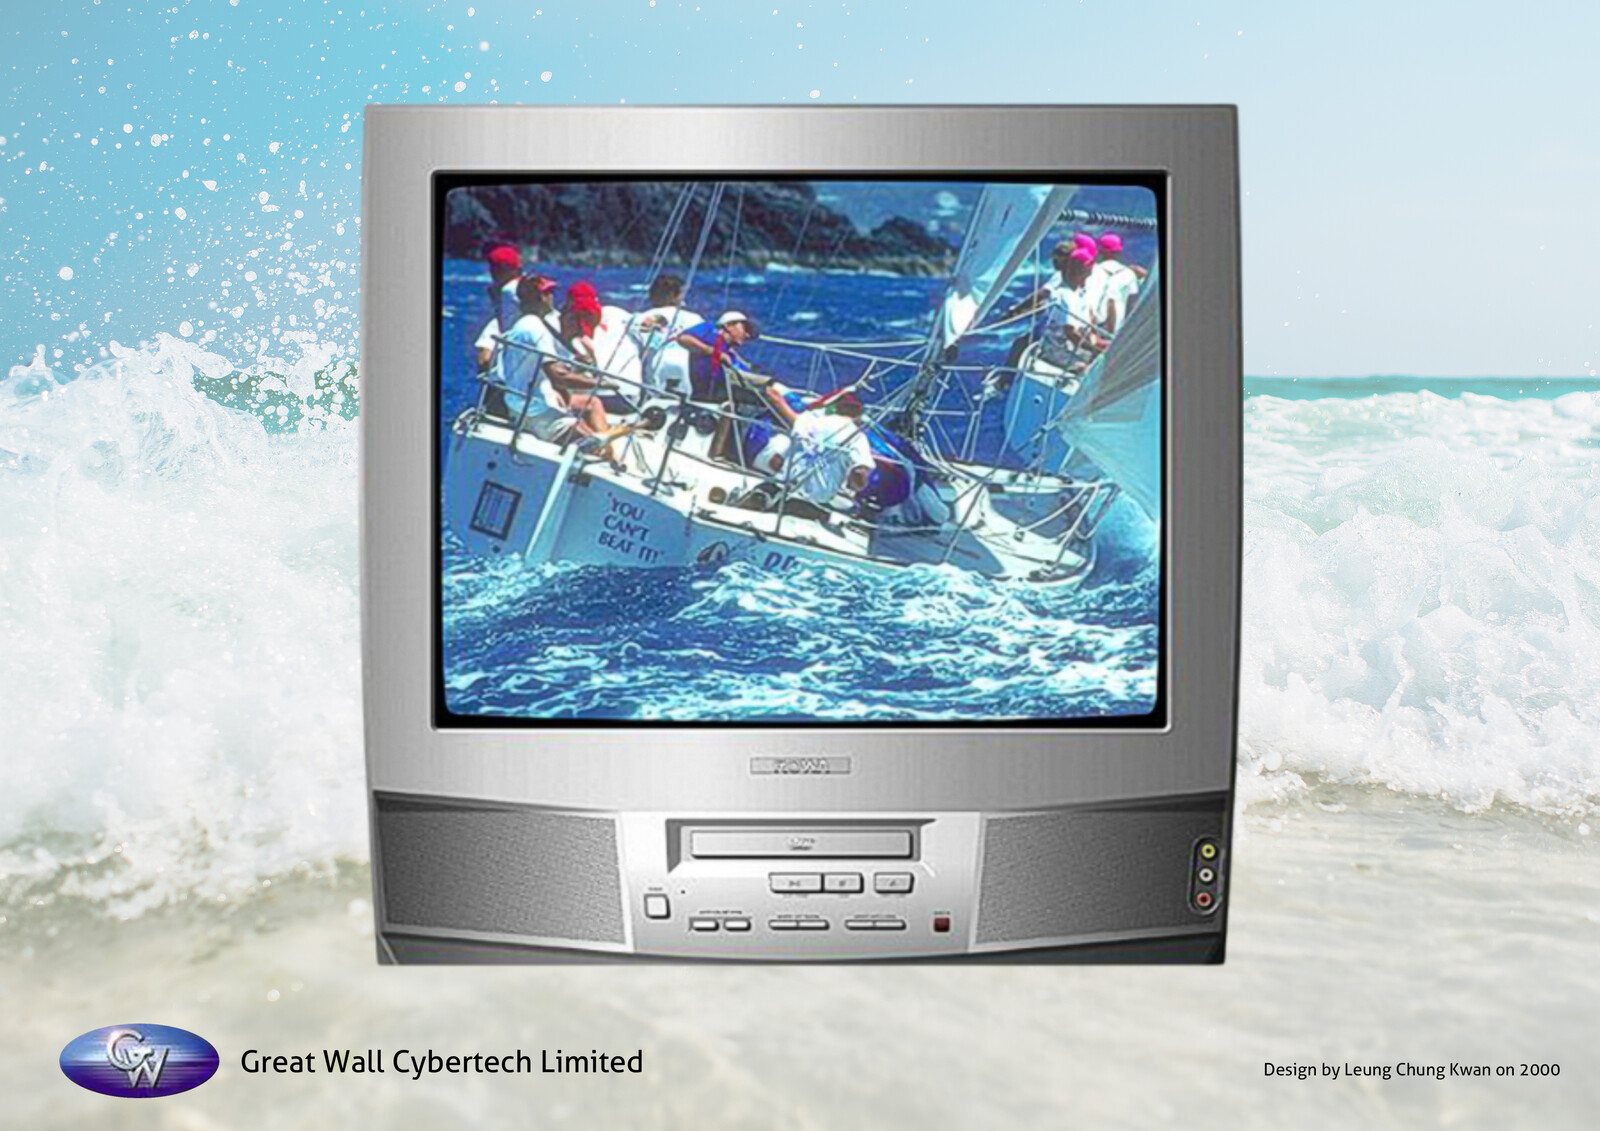 💎 CRT Color TV with DVD Player Combo | Design by Leung Chung Kwan on 2000 💎
Brand Name︰ROWA | Client︰Great Wall Cybertech Limited
More︰http://bit.ly/gw-t100